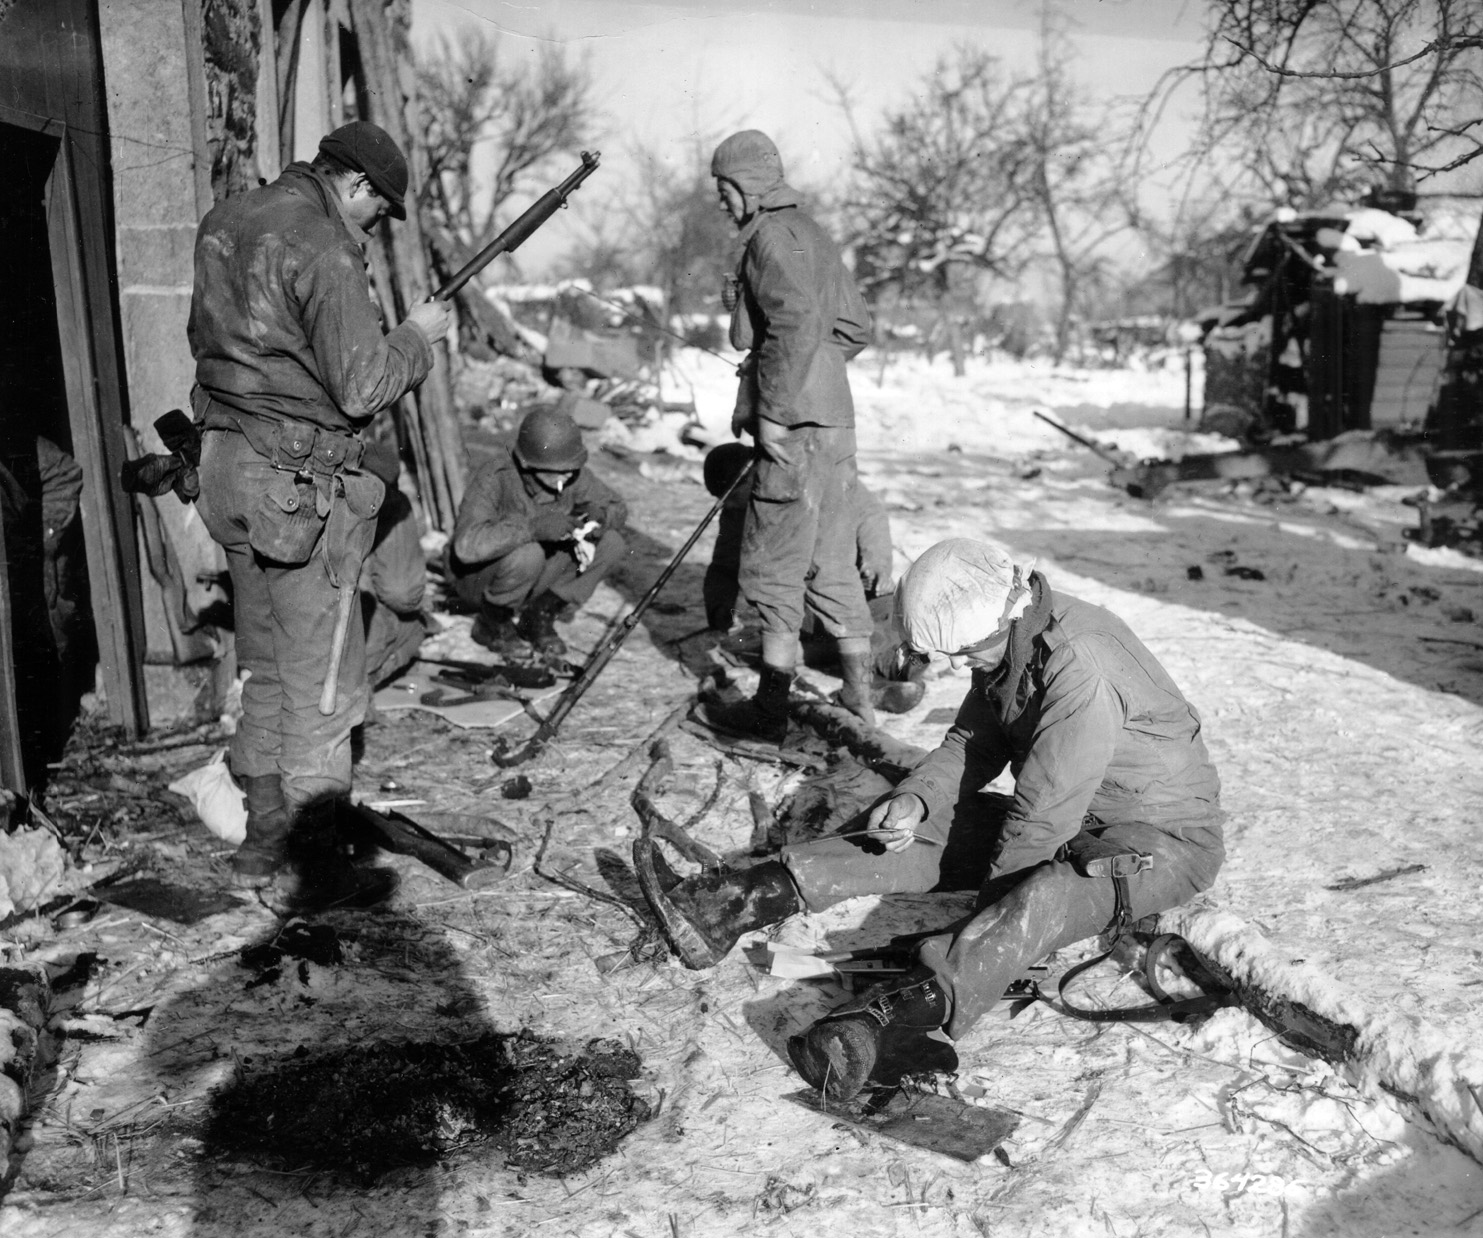 Soldiers of the 424th Infantry Regiment take a moment to clean their weapons during a lull in the fighting near the village of Wanne, Belgium. 